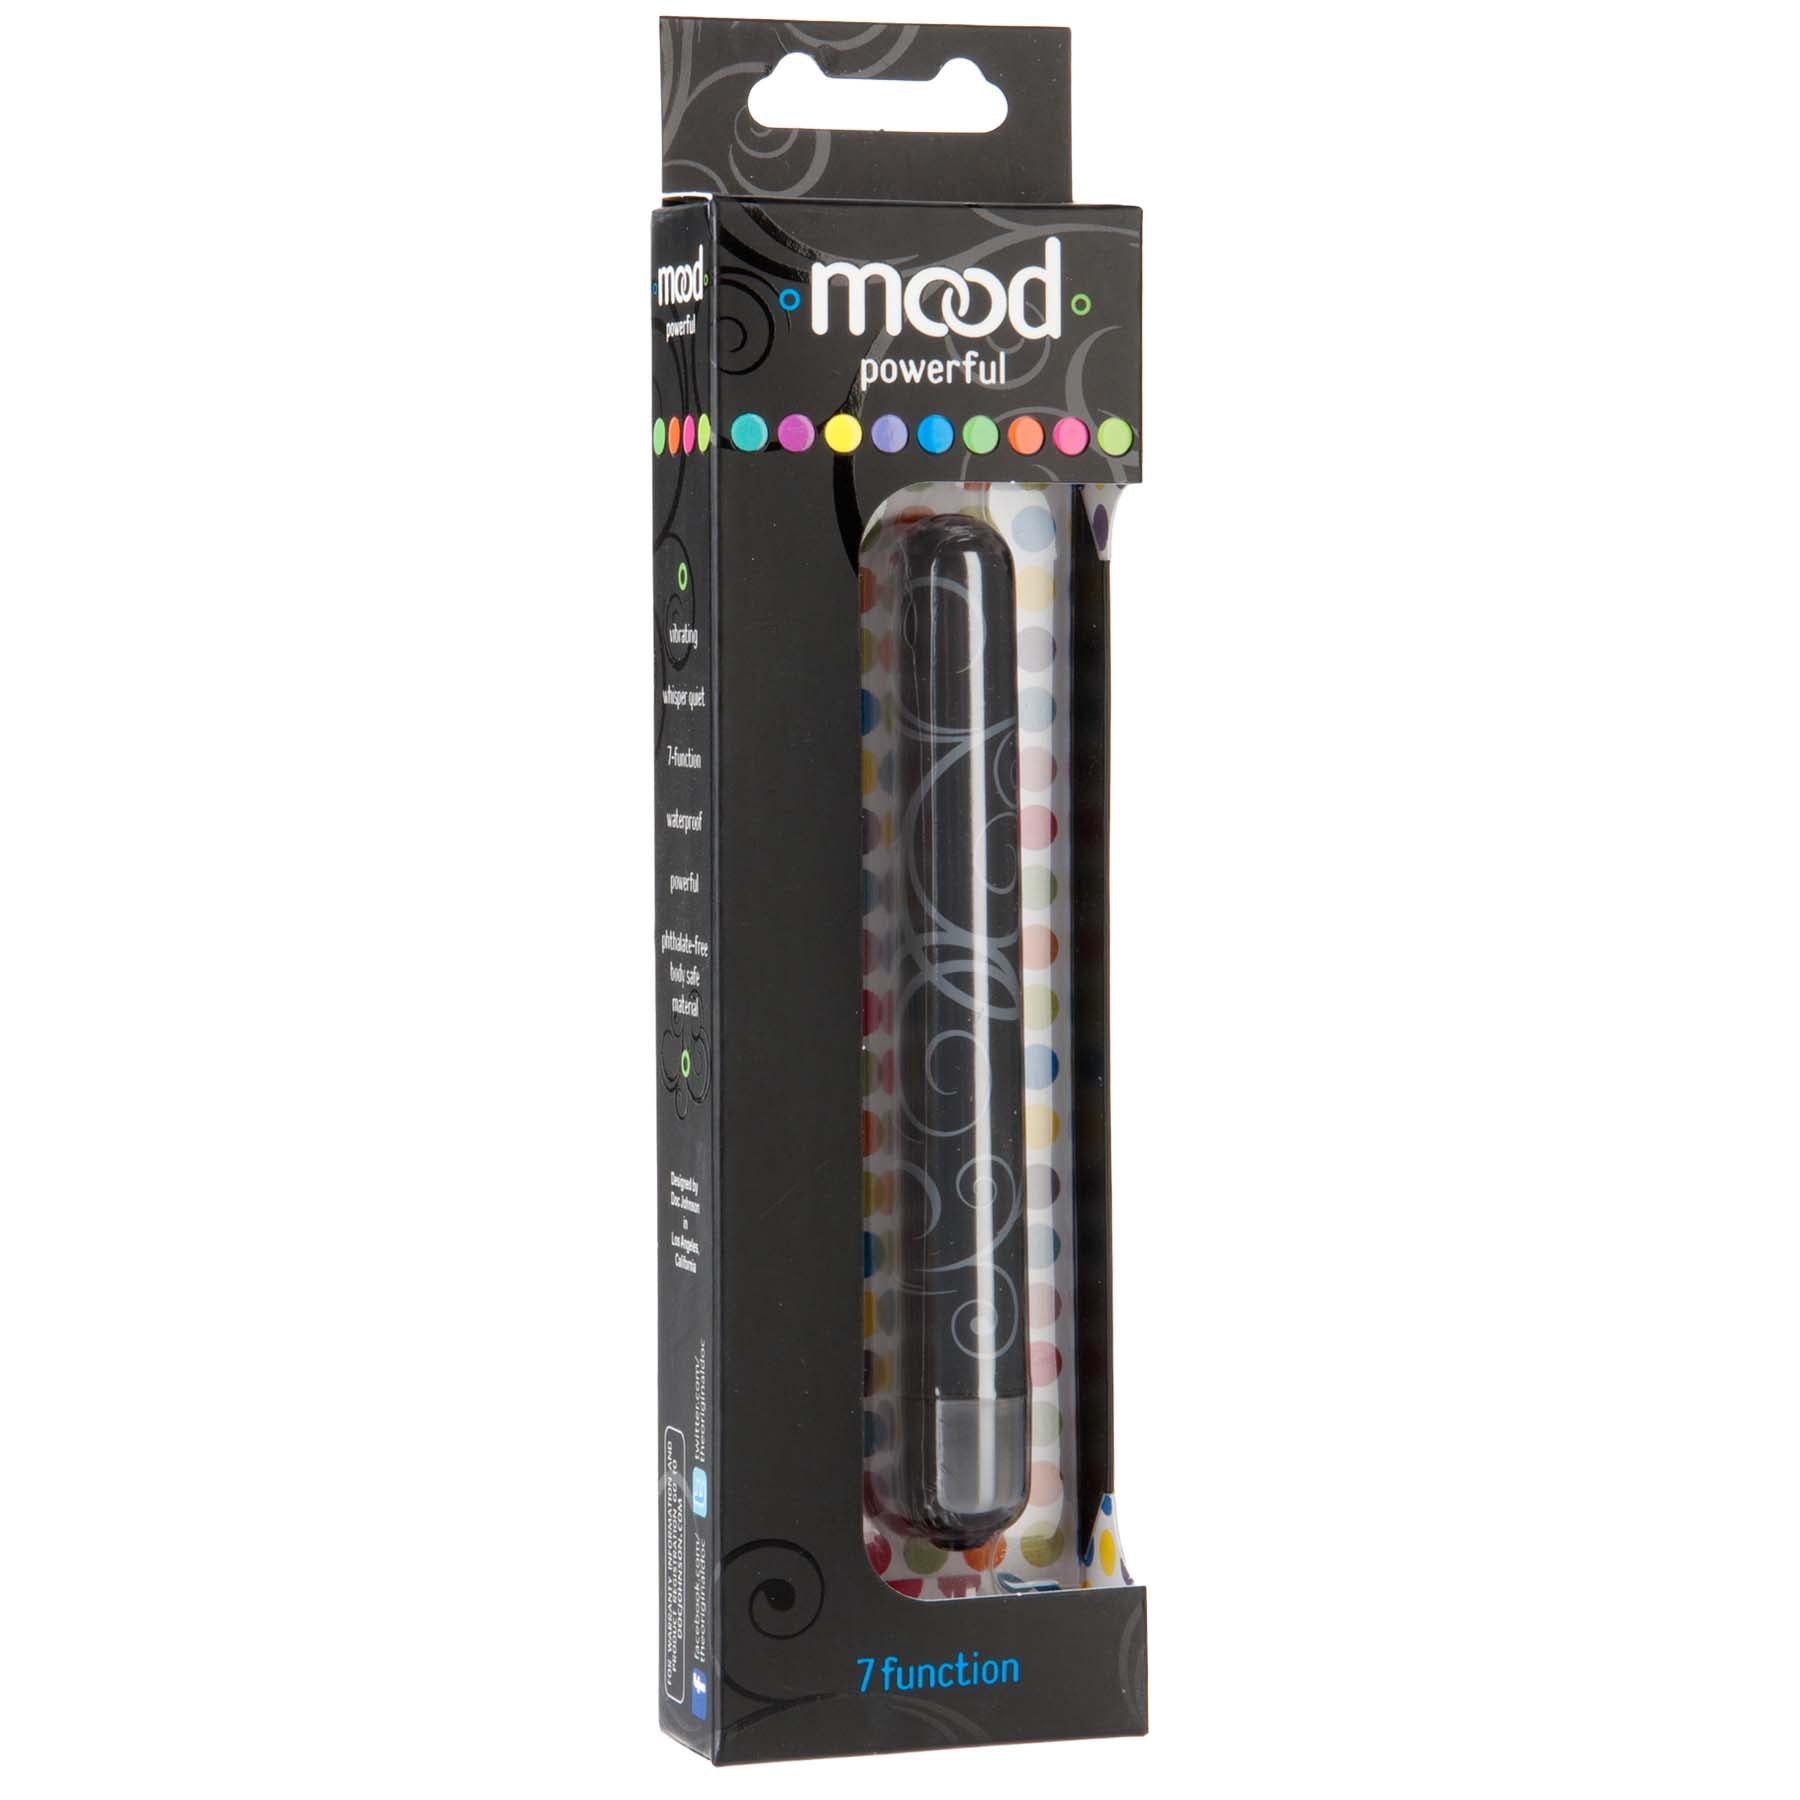 Mood Powerful 7-Function Bullets for Orgasmic Bliss L Black Black / Large